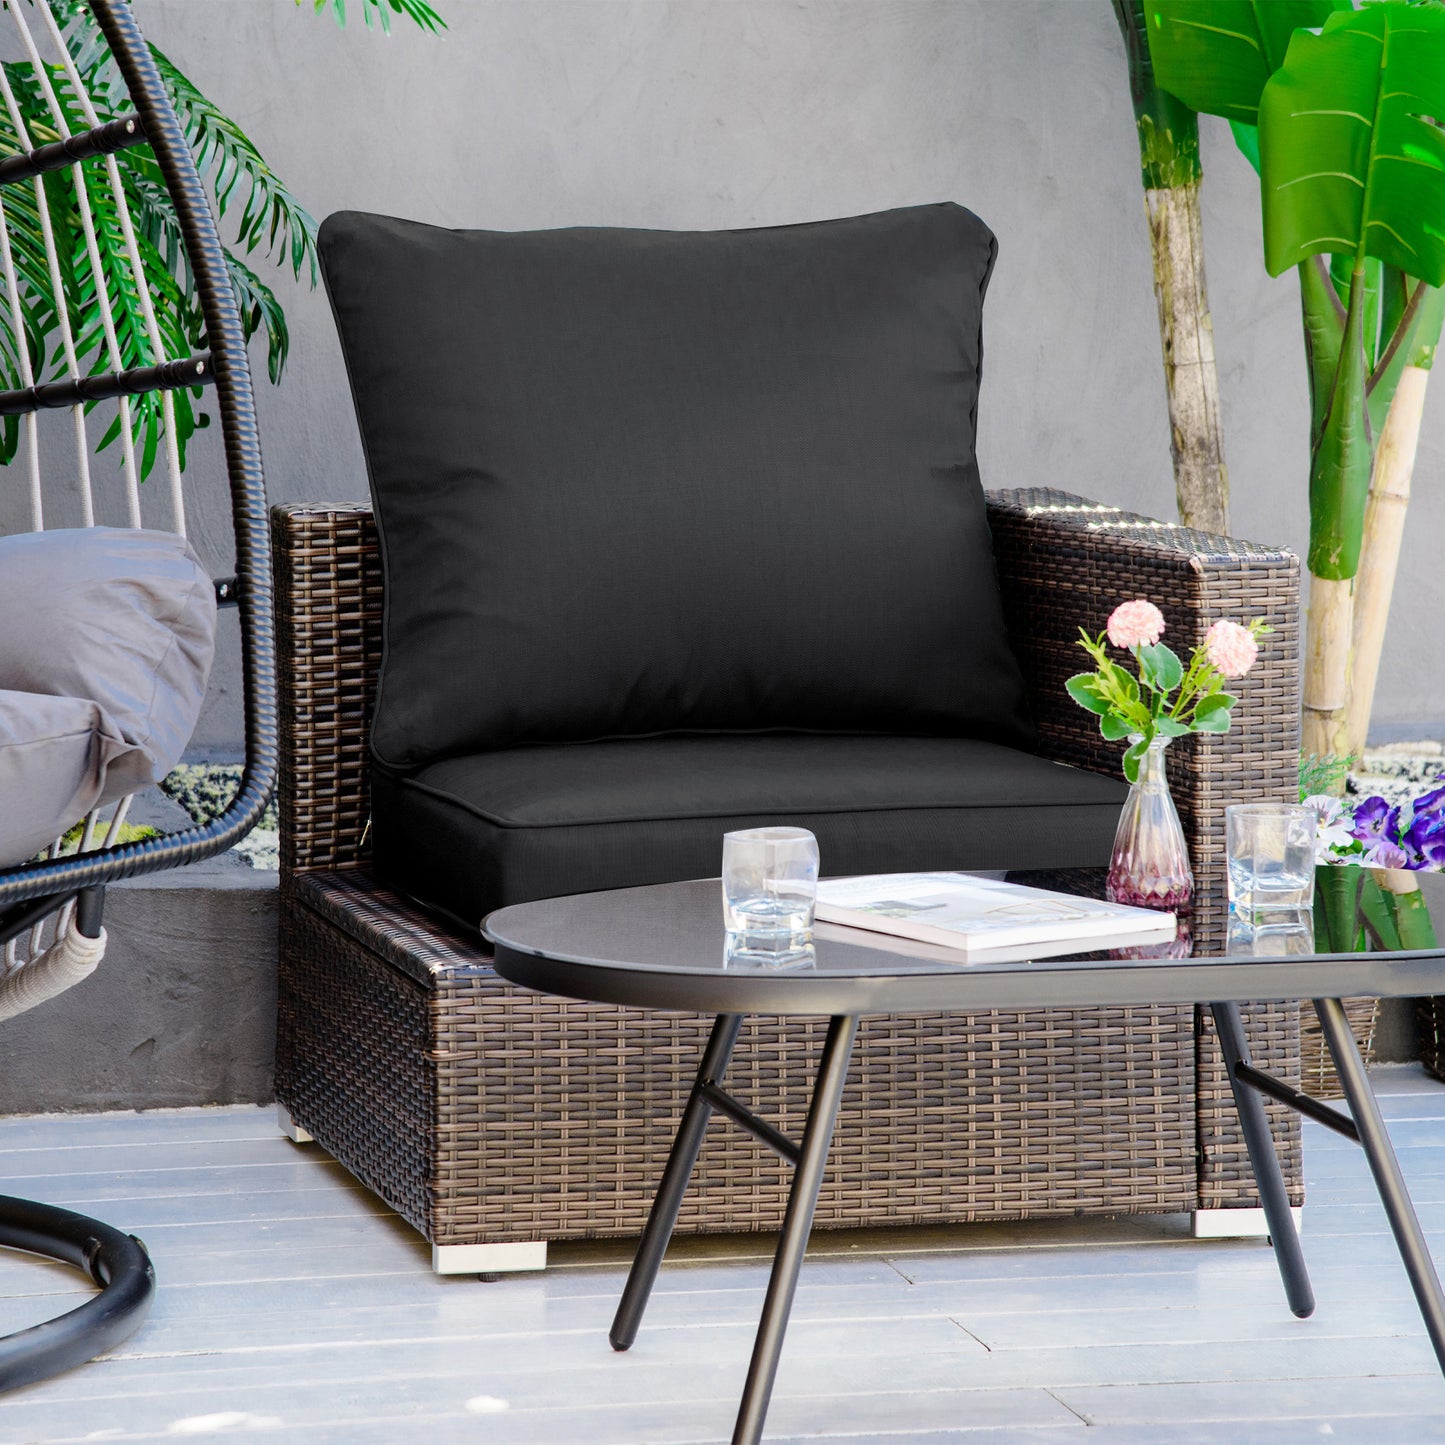 Outsunny Deep Seating Cushions: Plush Patio Furniture Replacements, Outdoor Comfort Redefined